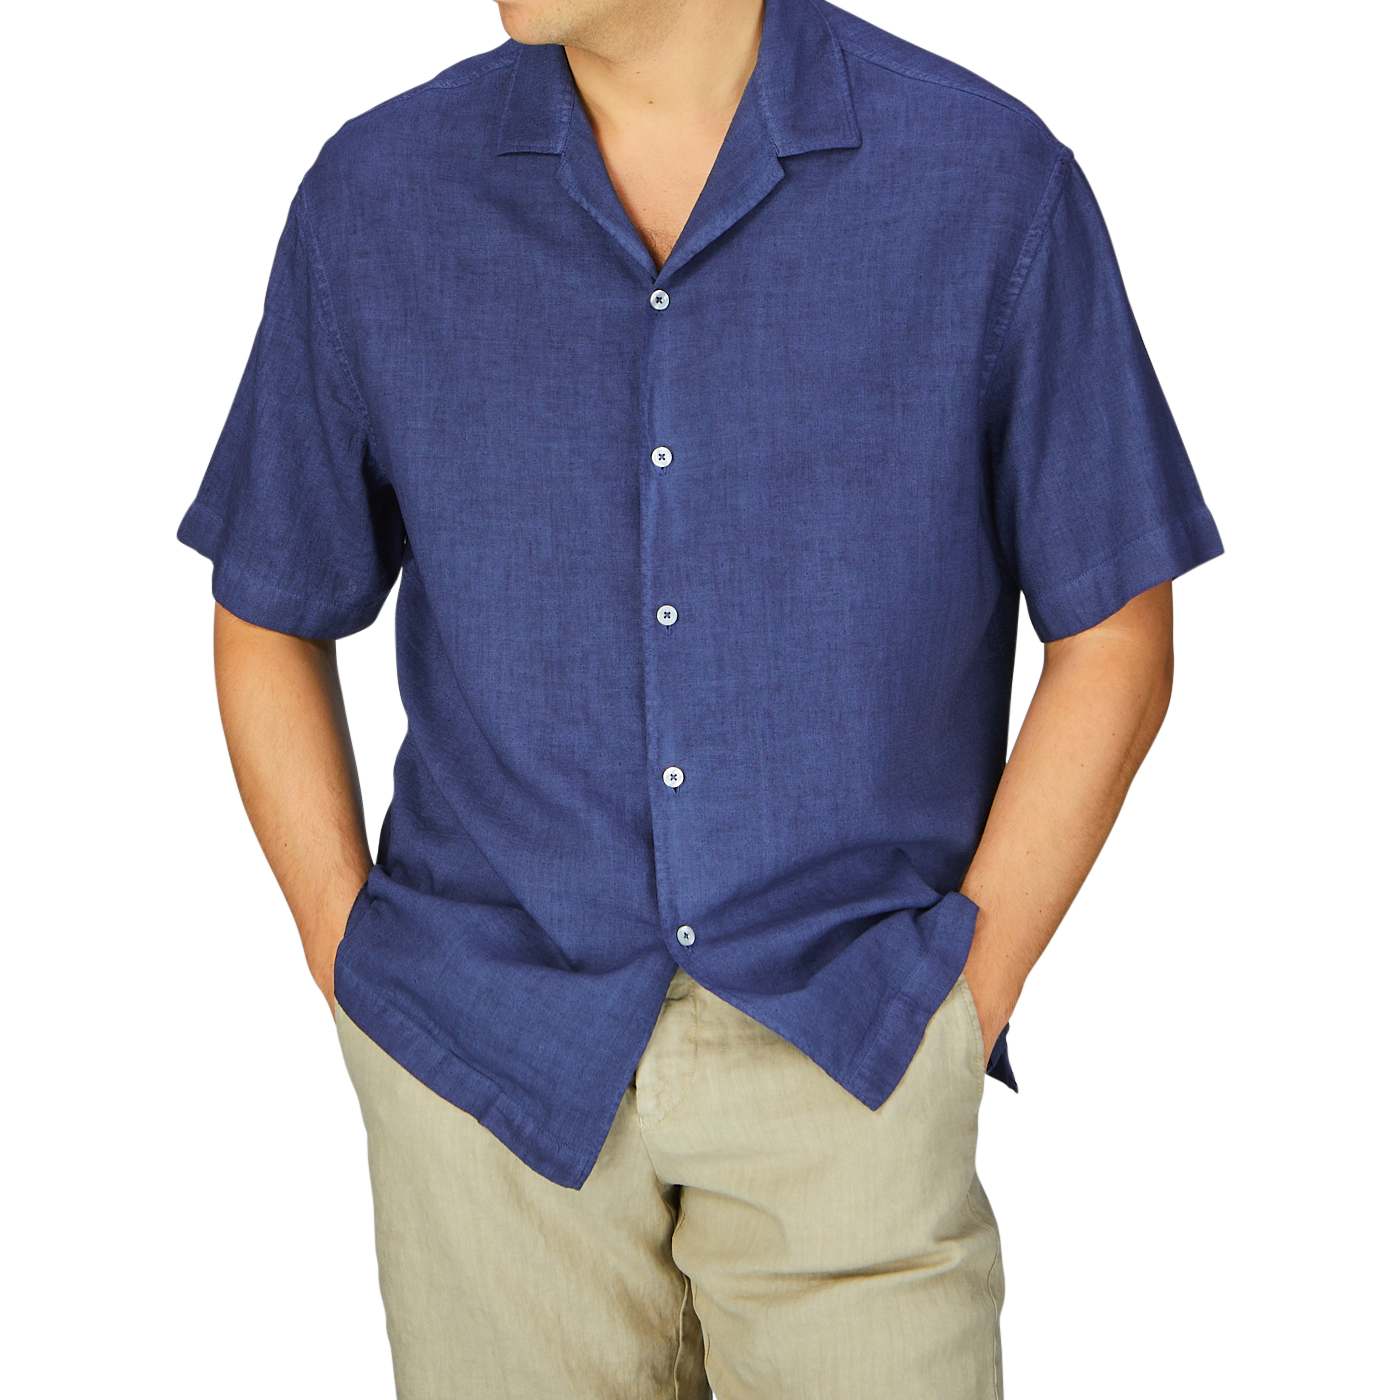 Man in a Dark Blue Linen Blend Open Collar Shirt and beige pants with hands in pockets, embodying a summer essential look by Altea.